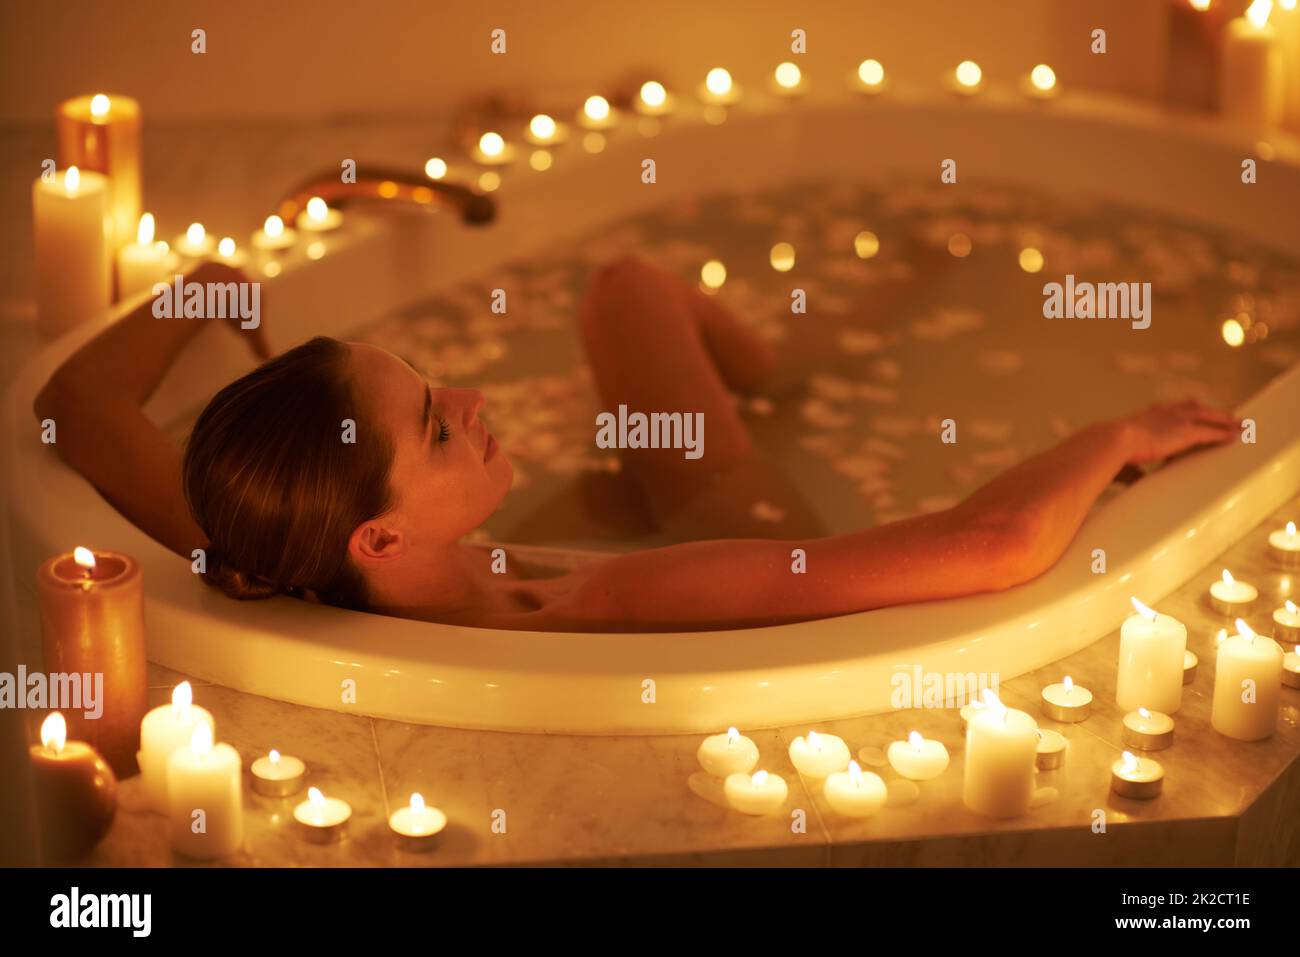 Relaxing Woman In Bath With Burning Candles Near by Stocksy Contributor  Sergey Narevskih - Stocksy